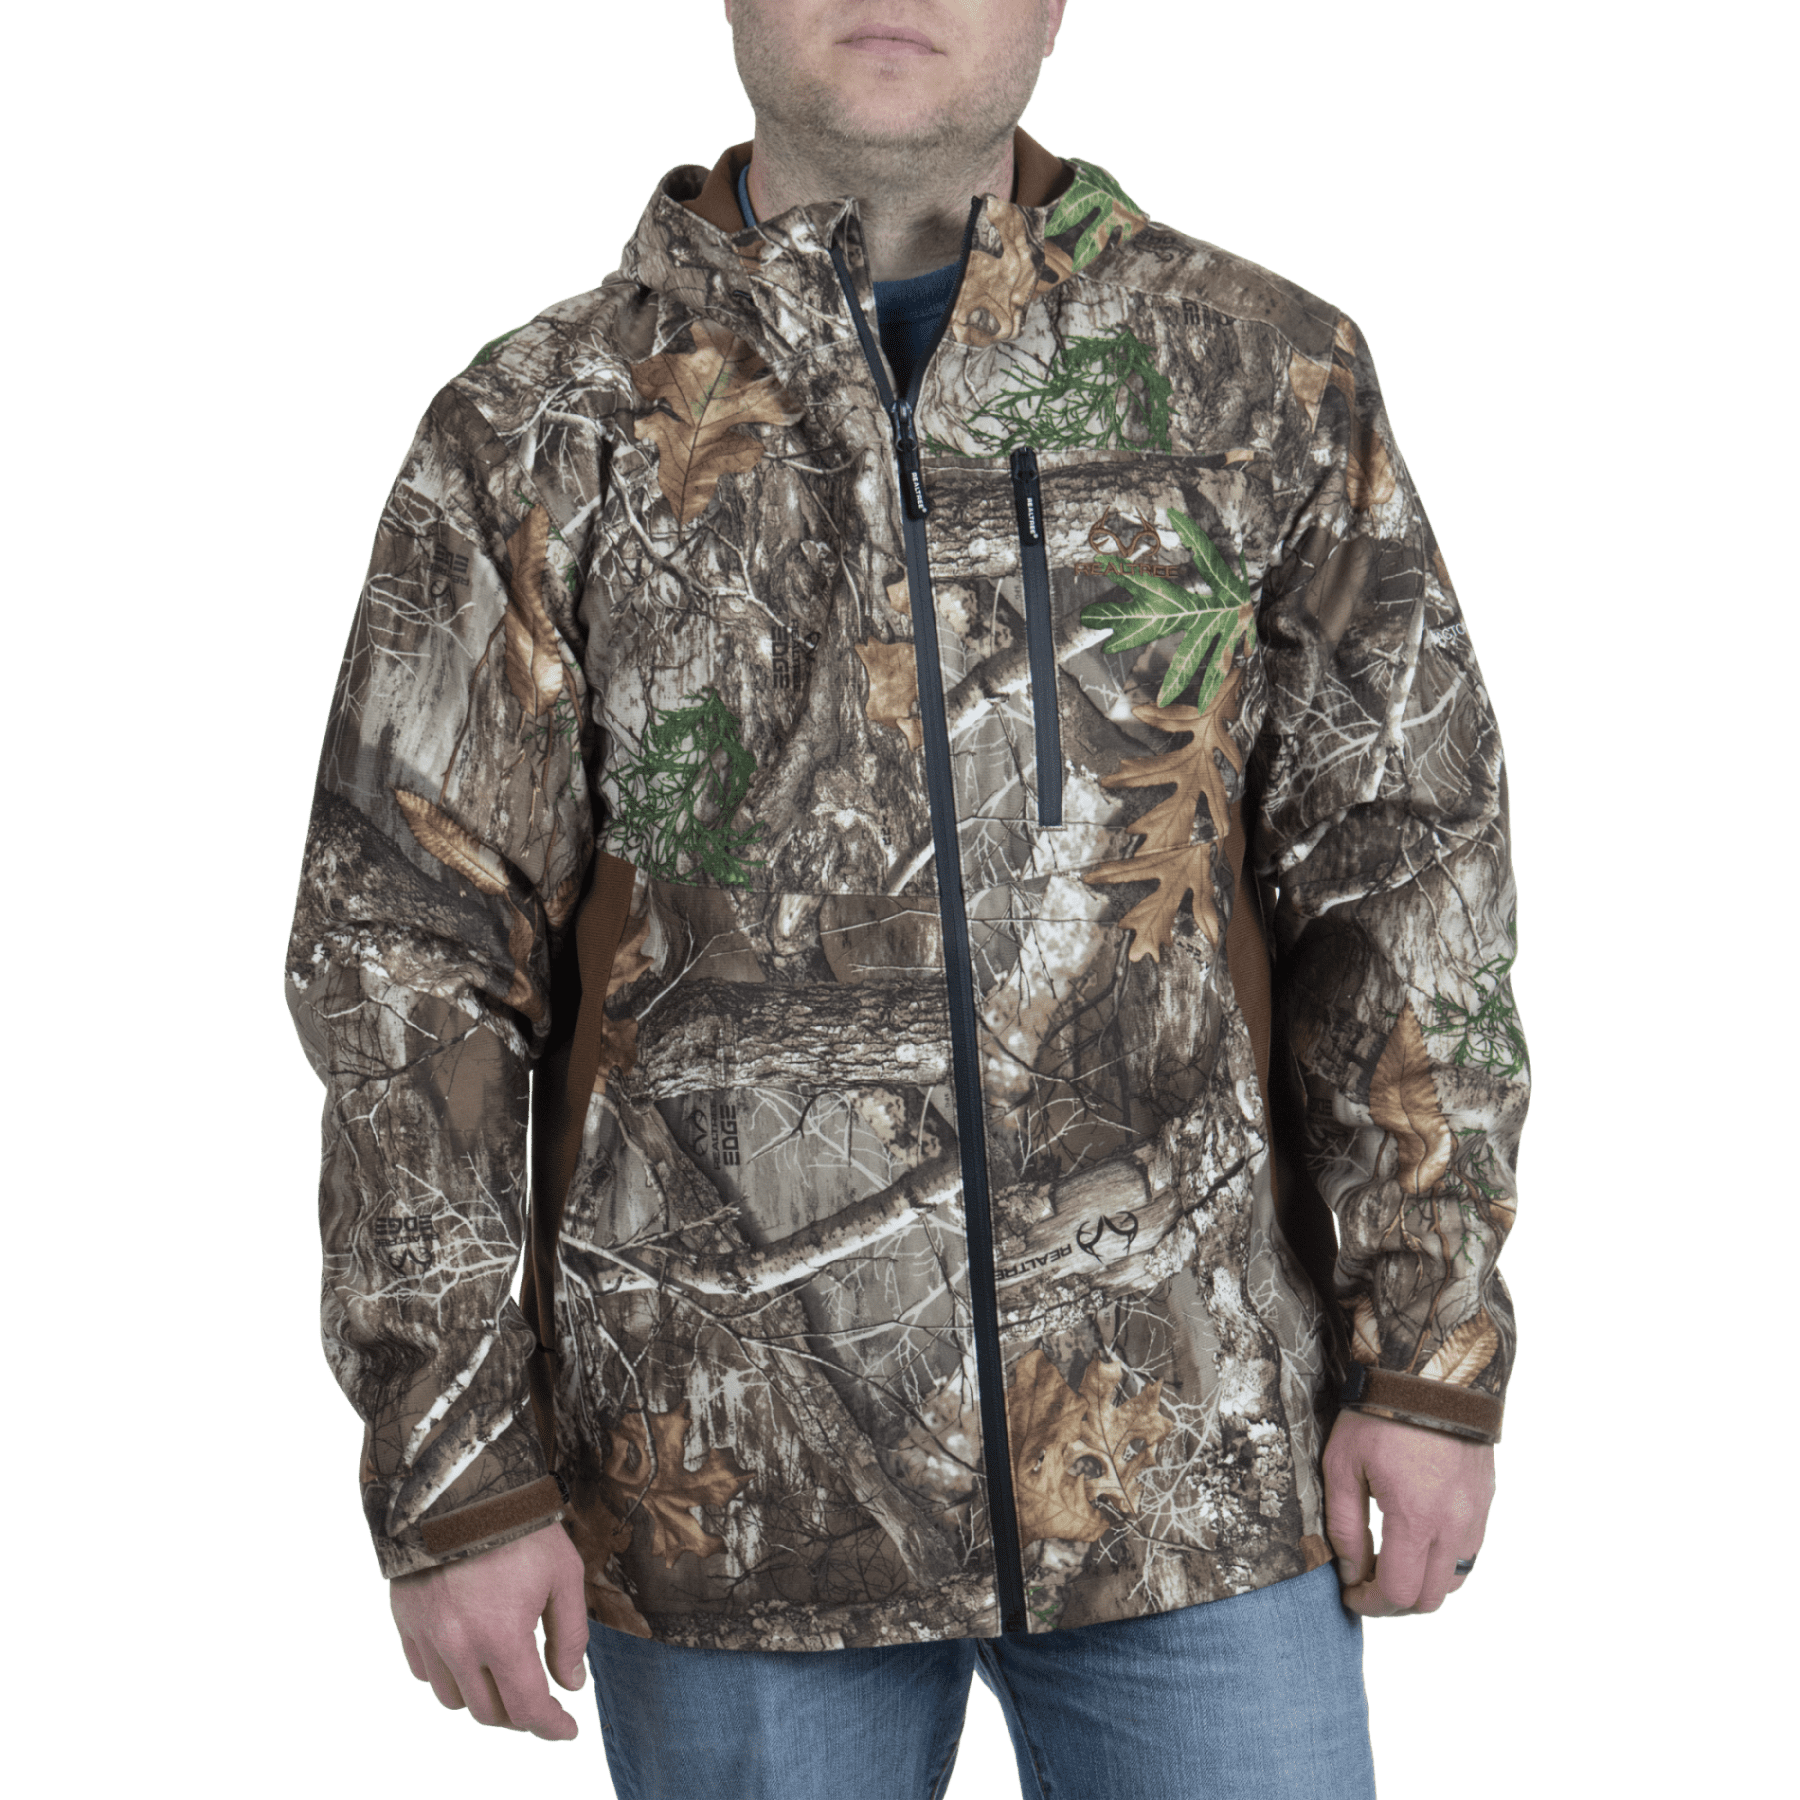 Realtree Men's Scent Control Hunting Jacket, Realtree Edge, Size Large ...